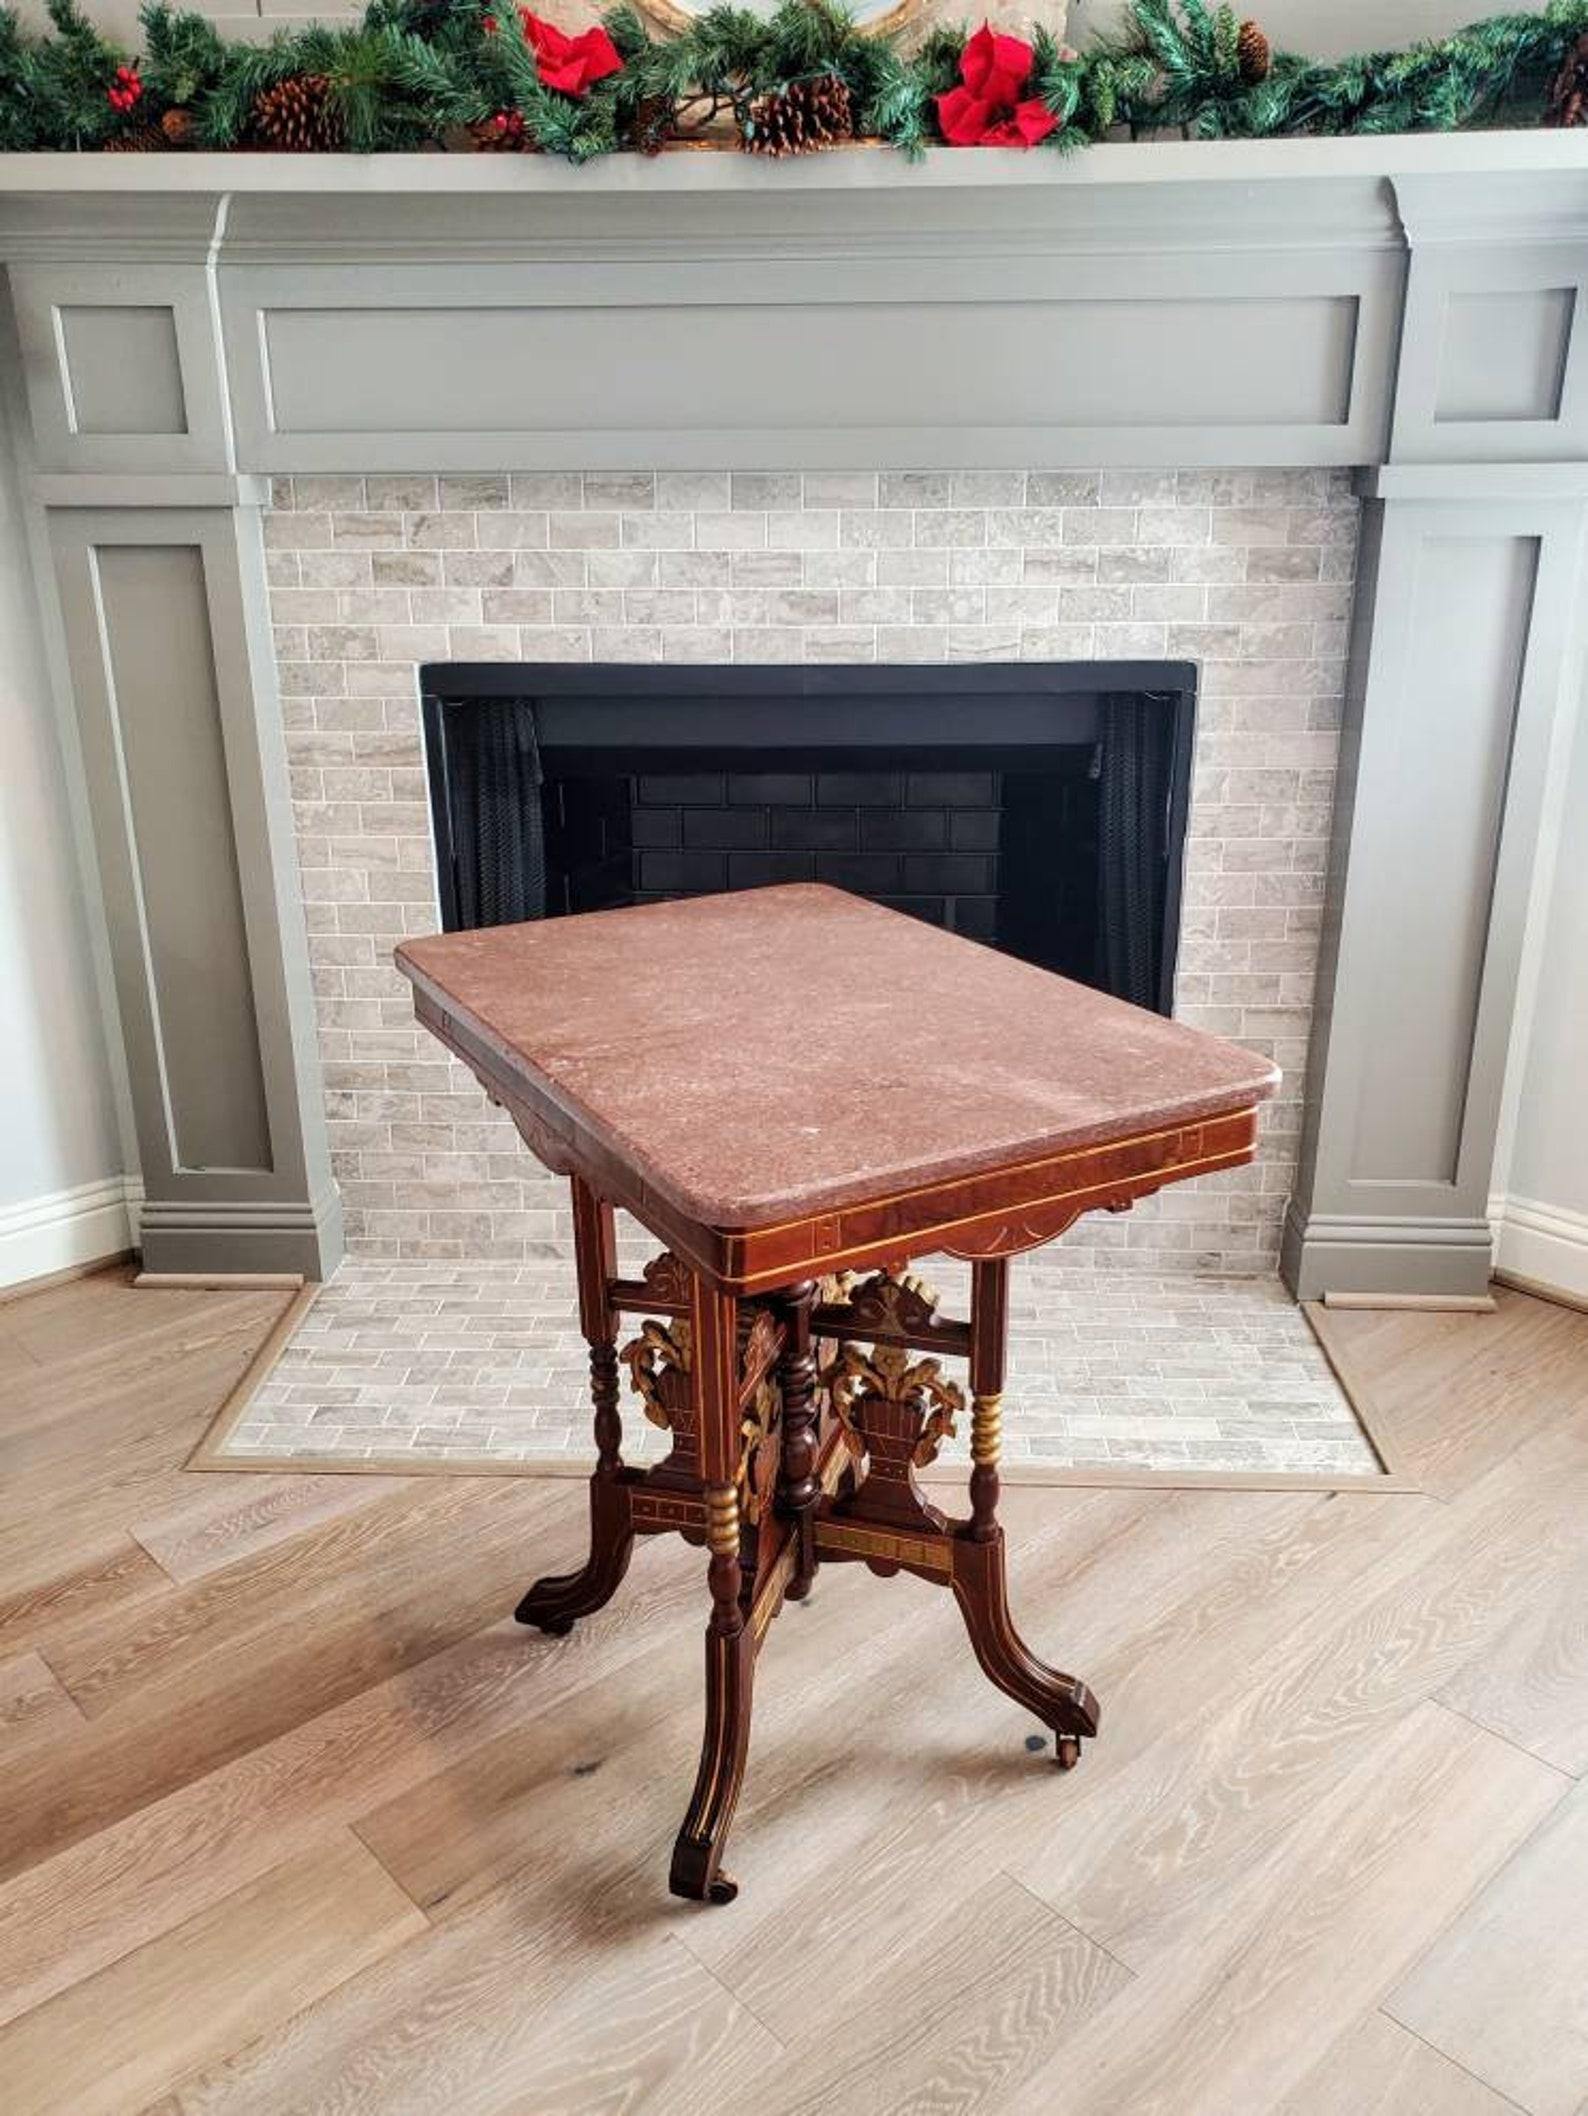 A superb example of Victorian splendor and its attributes, elegant, sophisticated, refined American high style, this richly decorated parlor (center) table features the original substantial rouge marble stone slab top with molded edge, over a solid